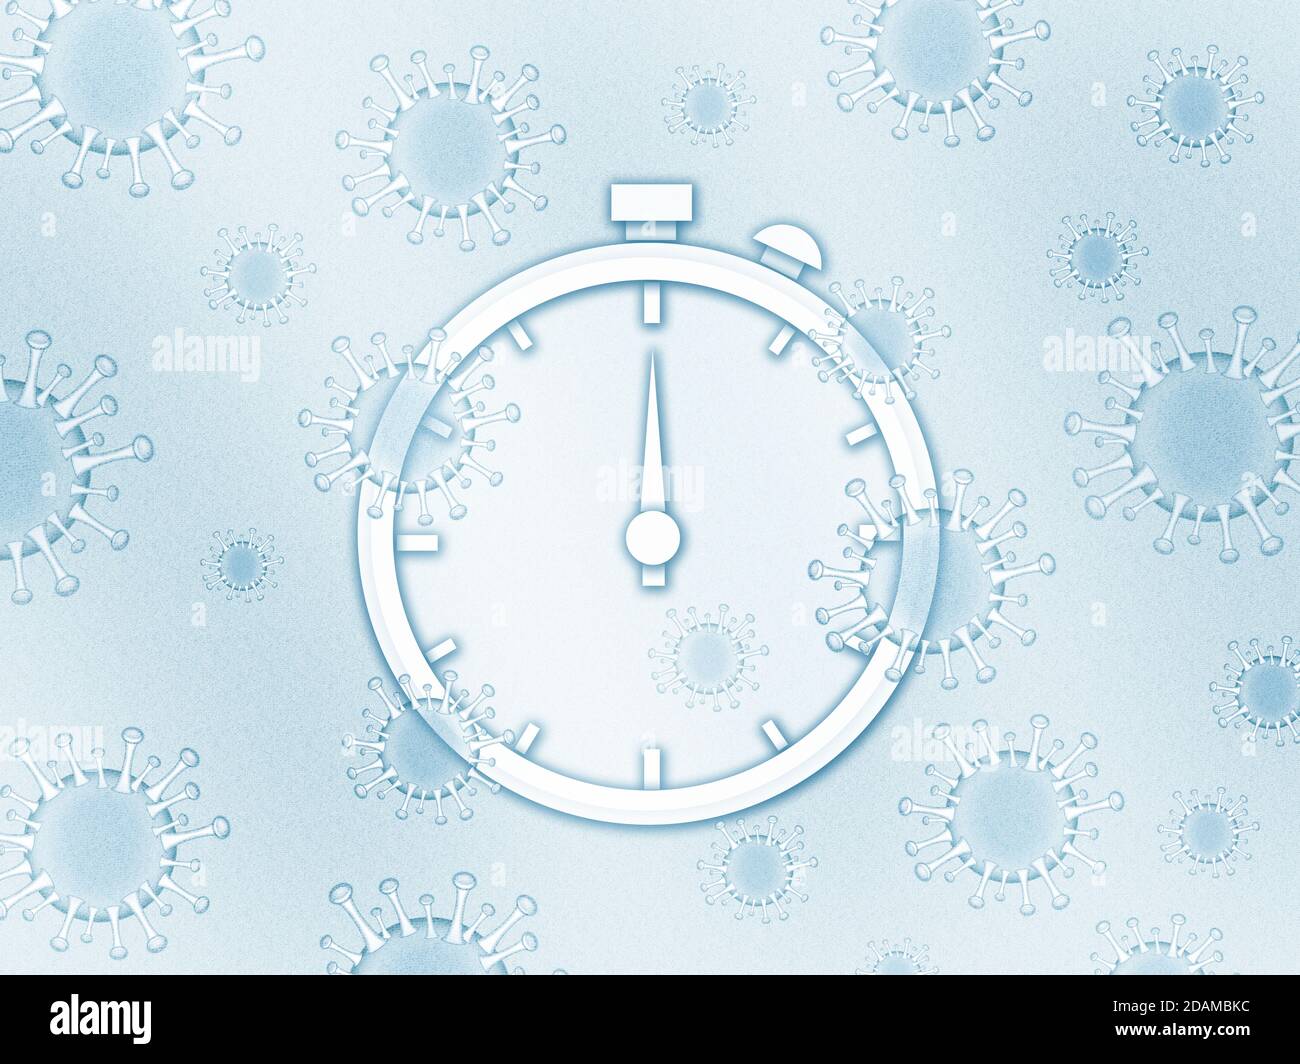 Stopwatch with covid-19 viruses, illustration. Stock Photo